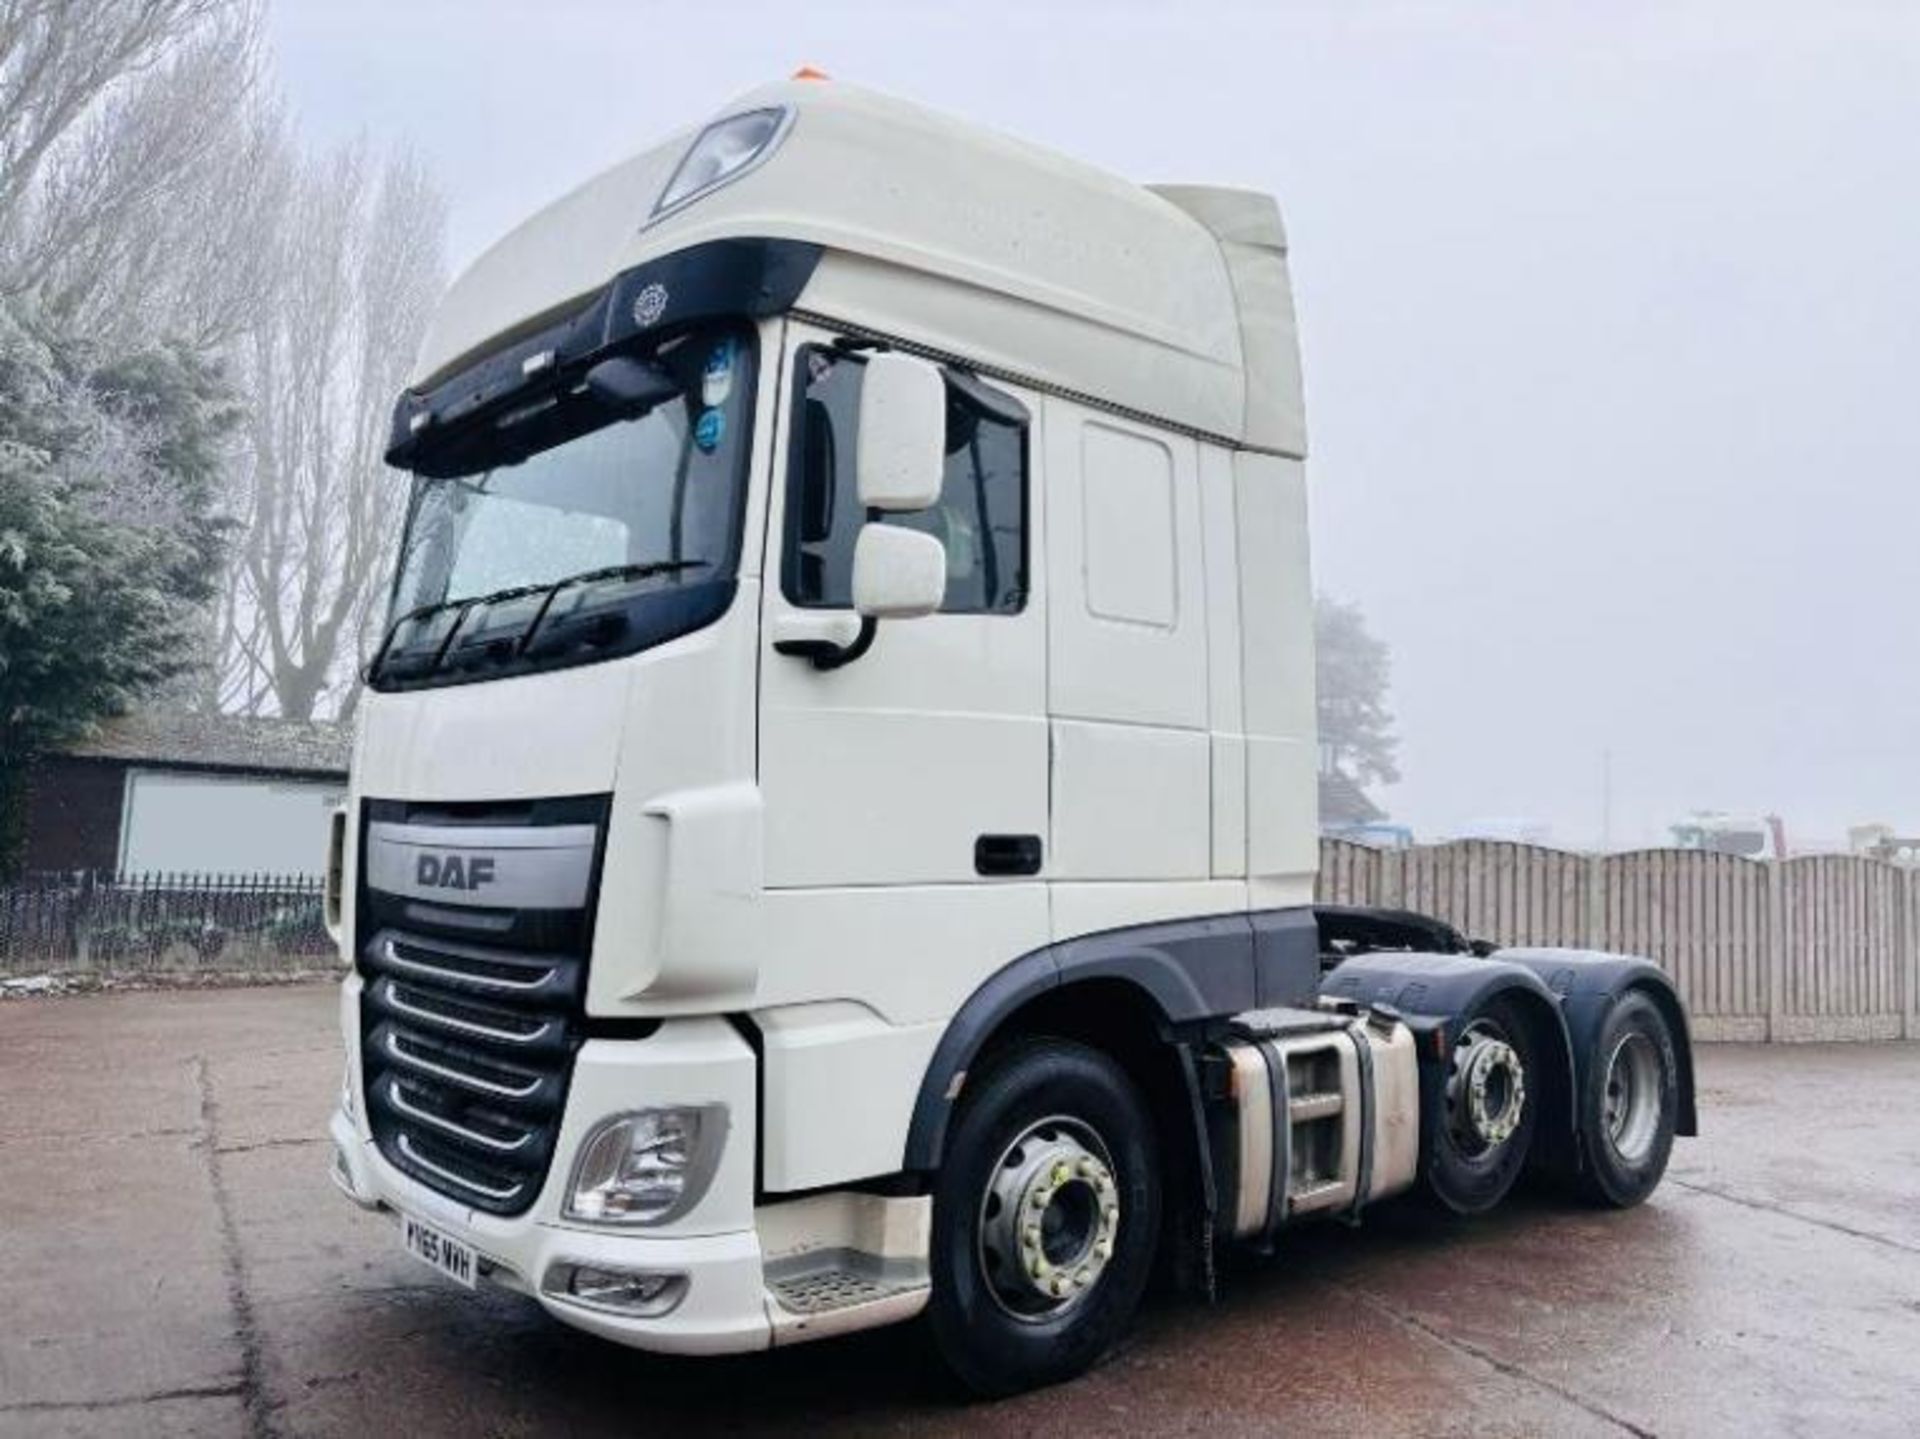 DAF XF510 6X2 TRACTOR UNIT *YEAR 2016, MOT'D TILL APRIL 2024* - READING 700328 KMS - Image 16 of 18